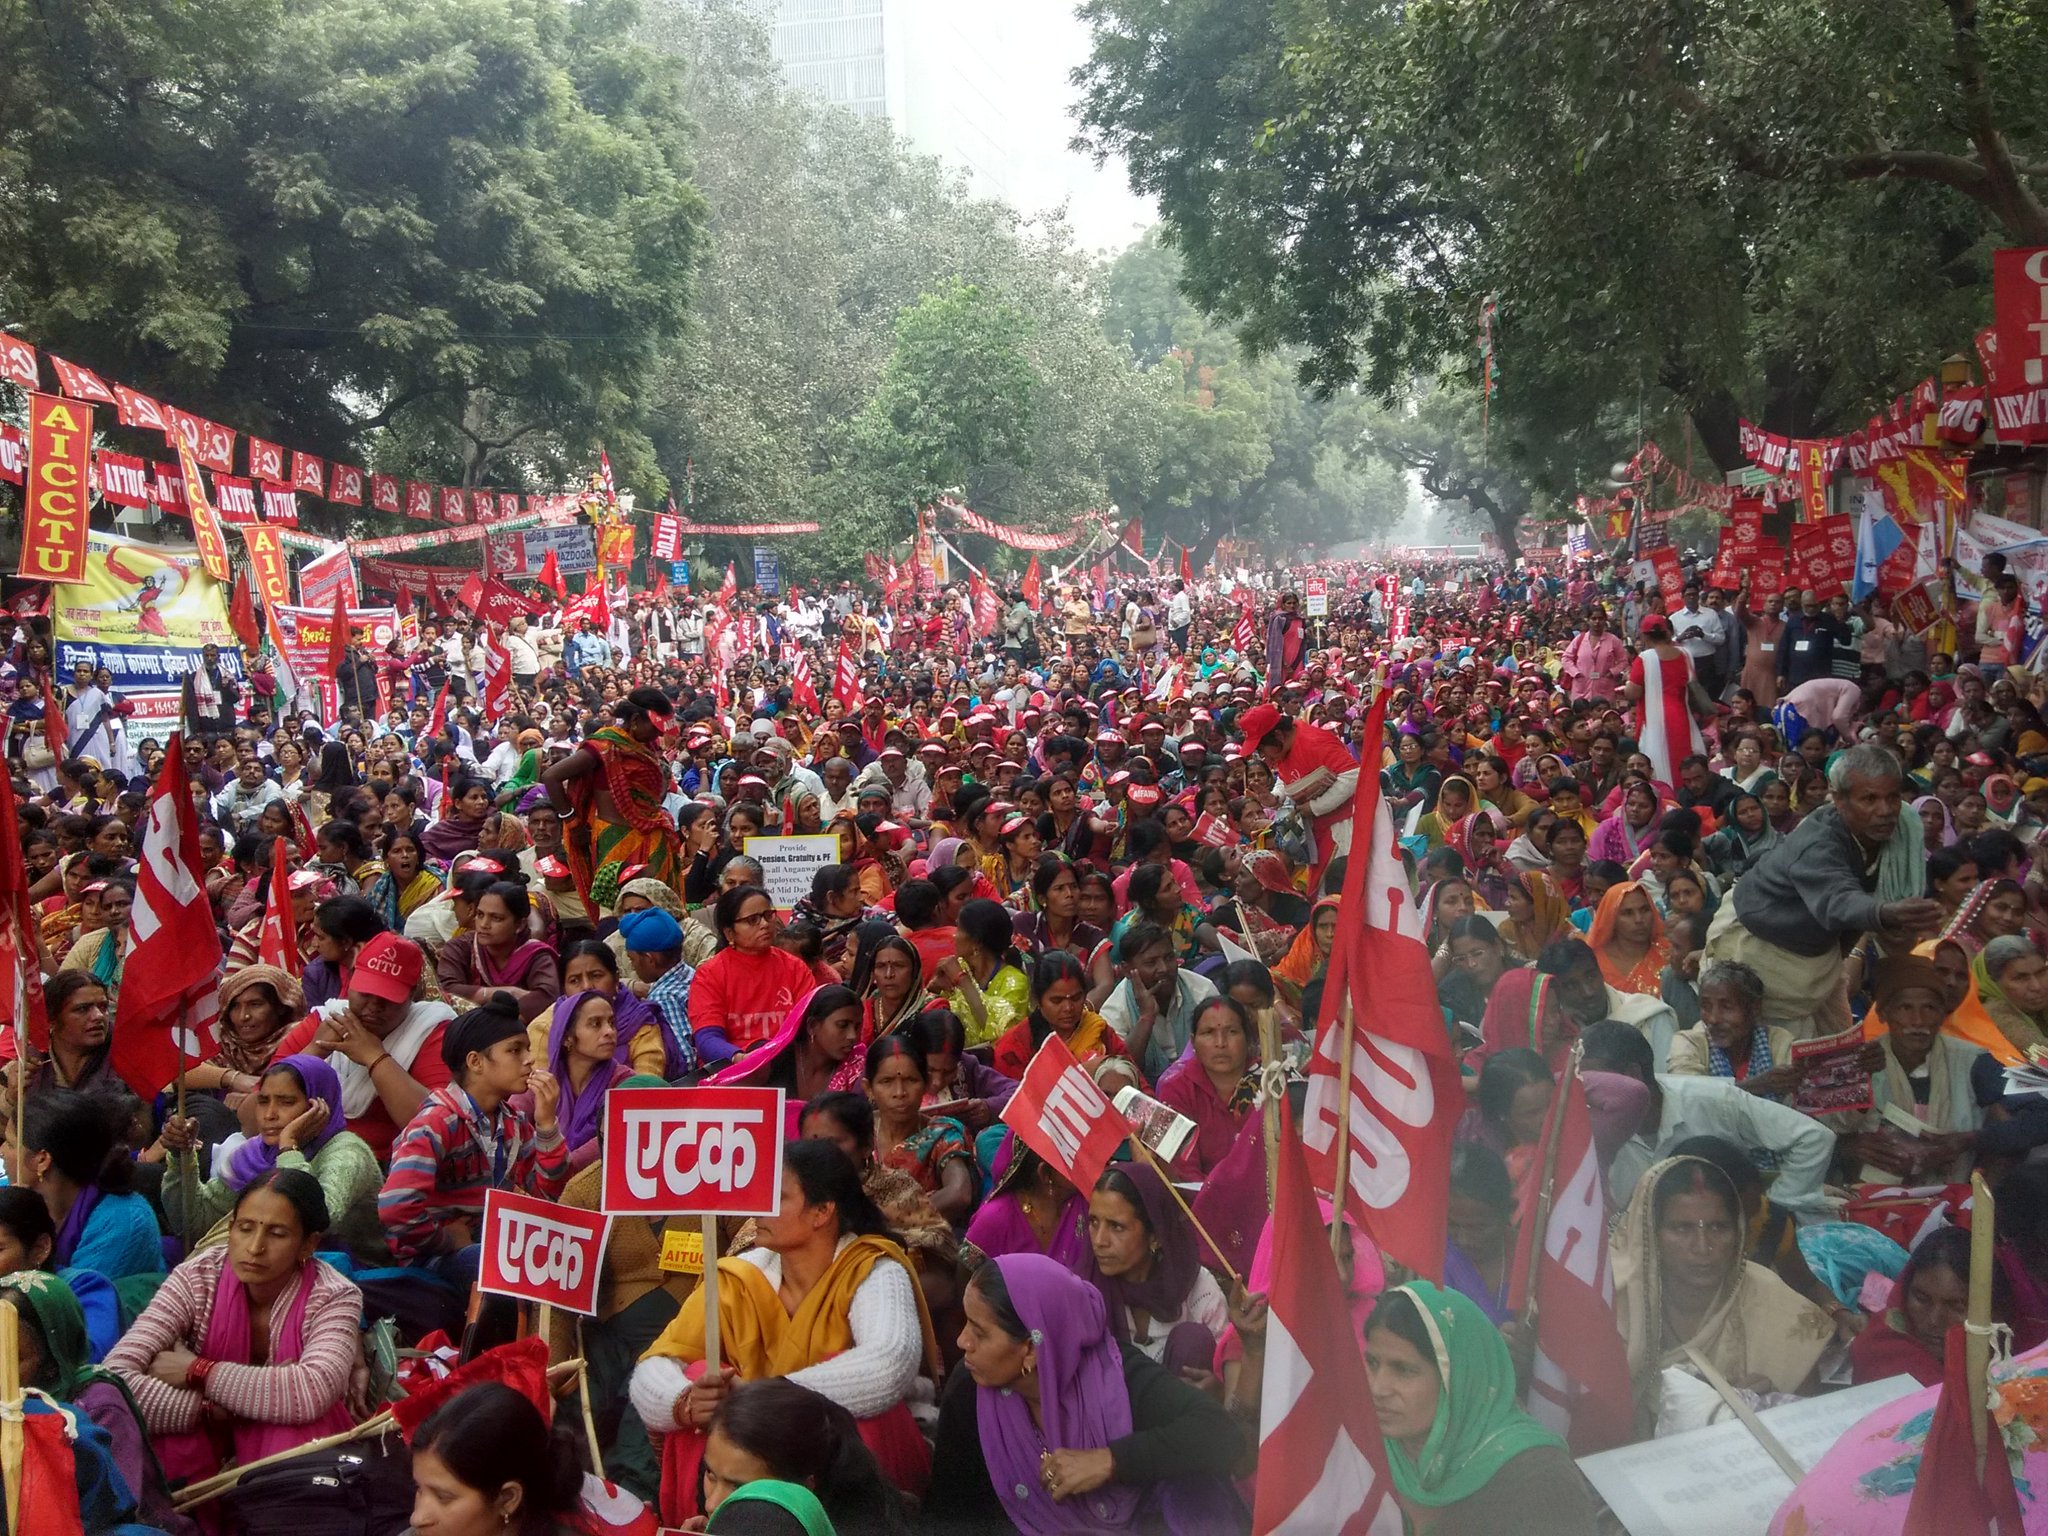 Indian unions mobilize thousands of workers to protest anti-worker